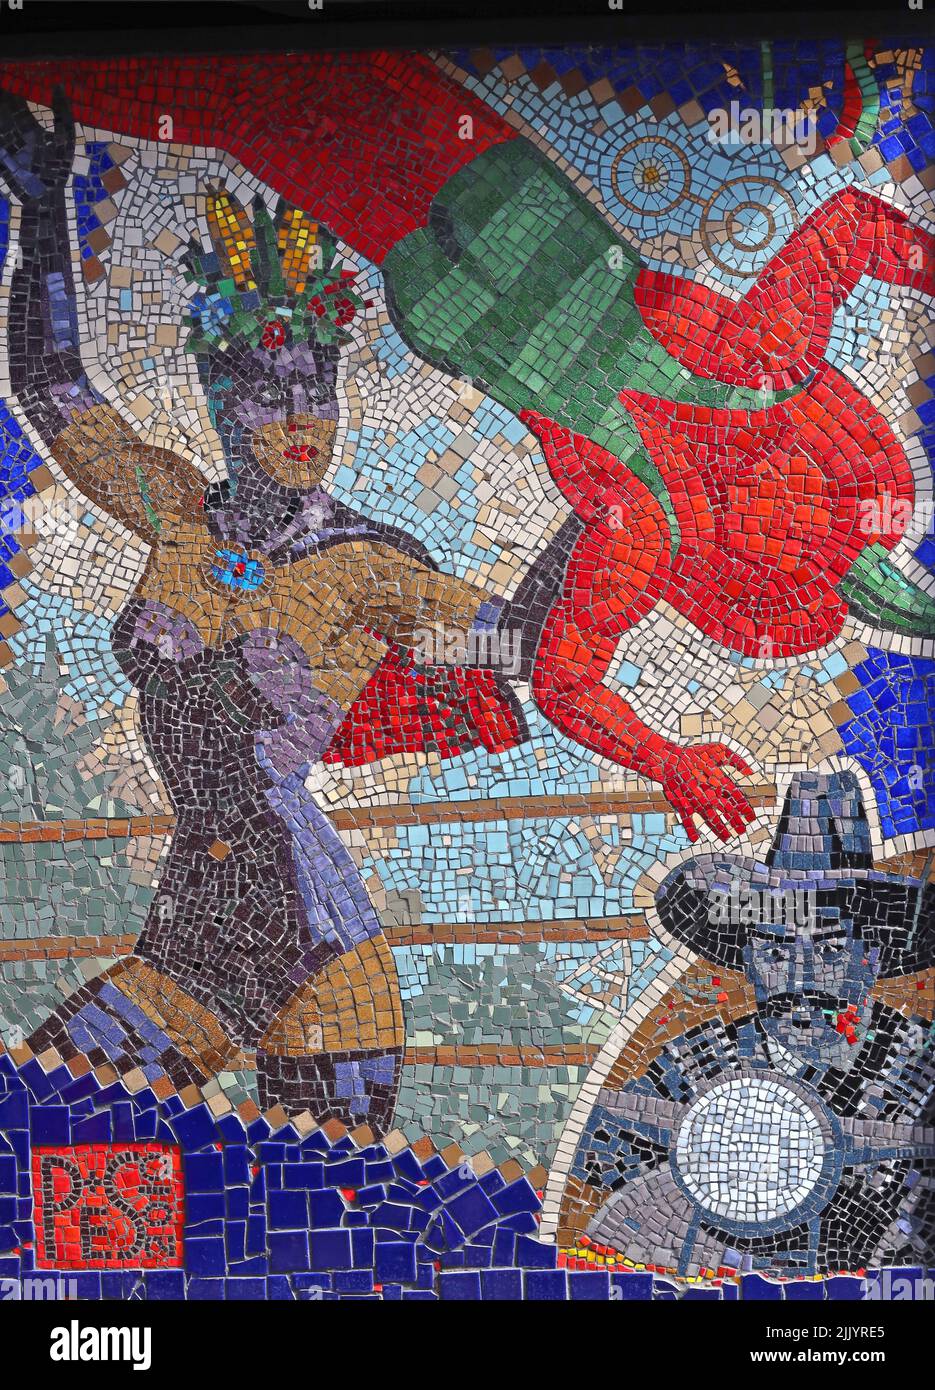 Soho woman dancer mosaic,  pes2010 - mosaic on the cocktail bar and restaurant El Camion on Brewer Street Stock Photo